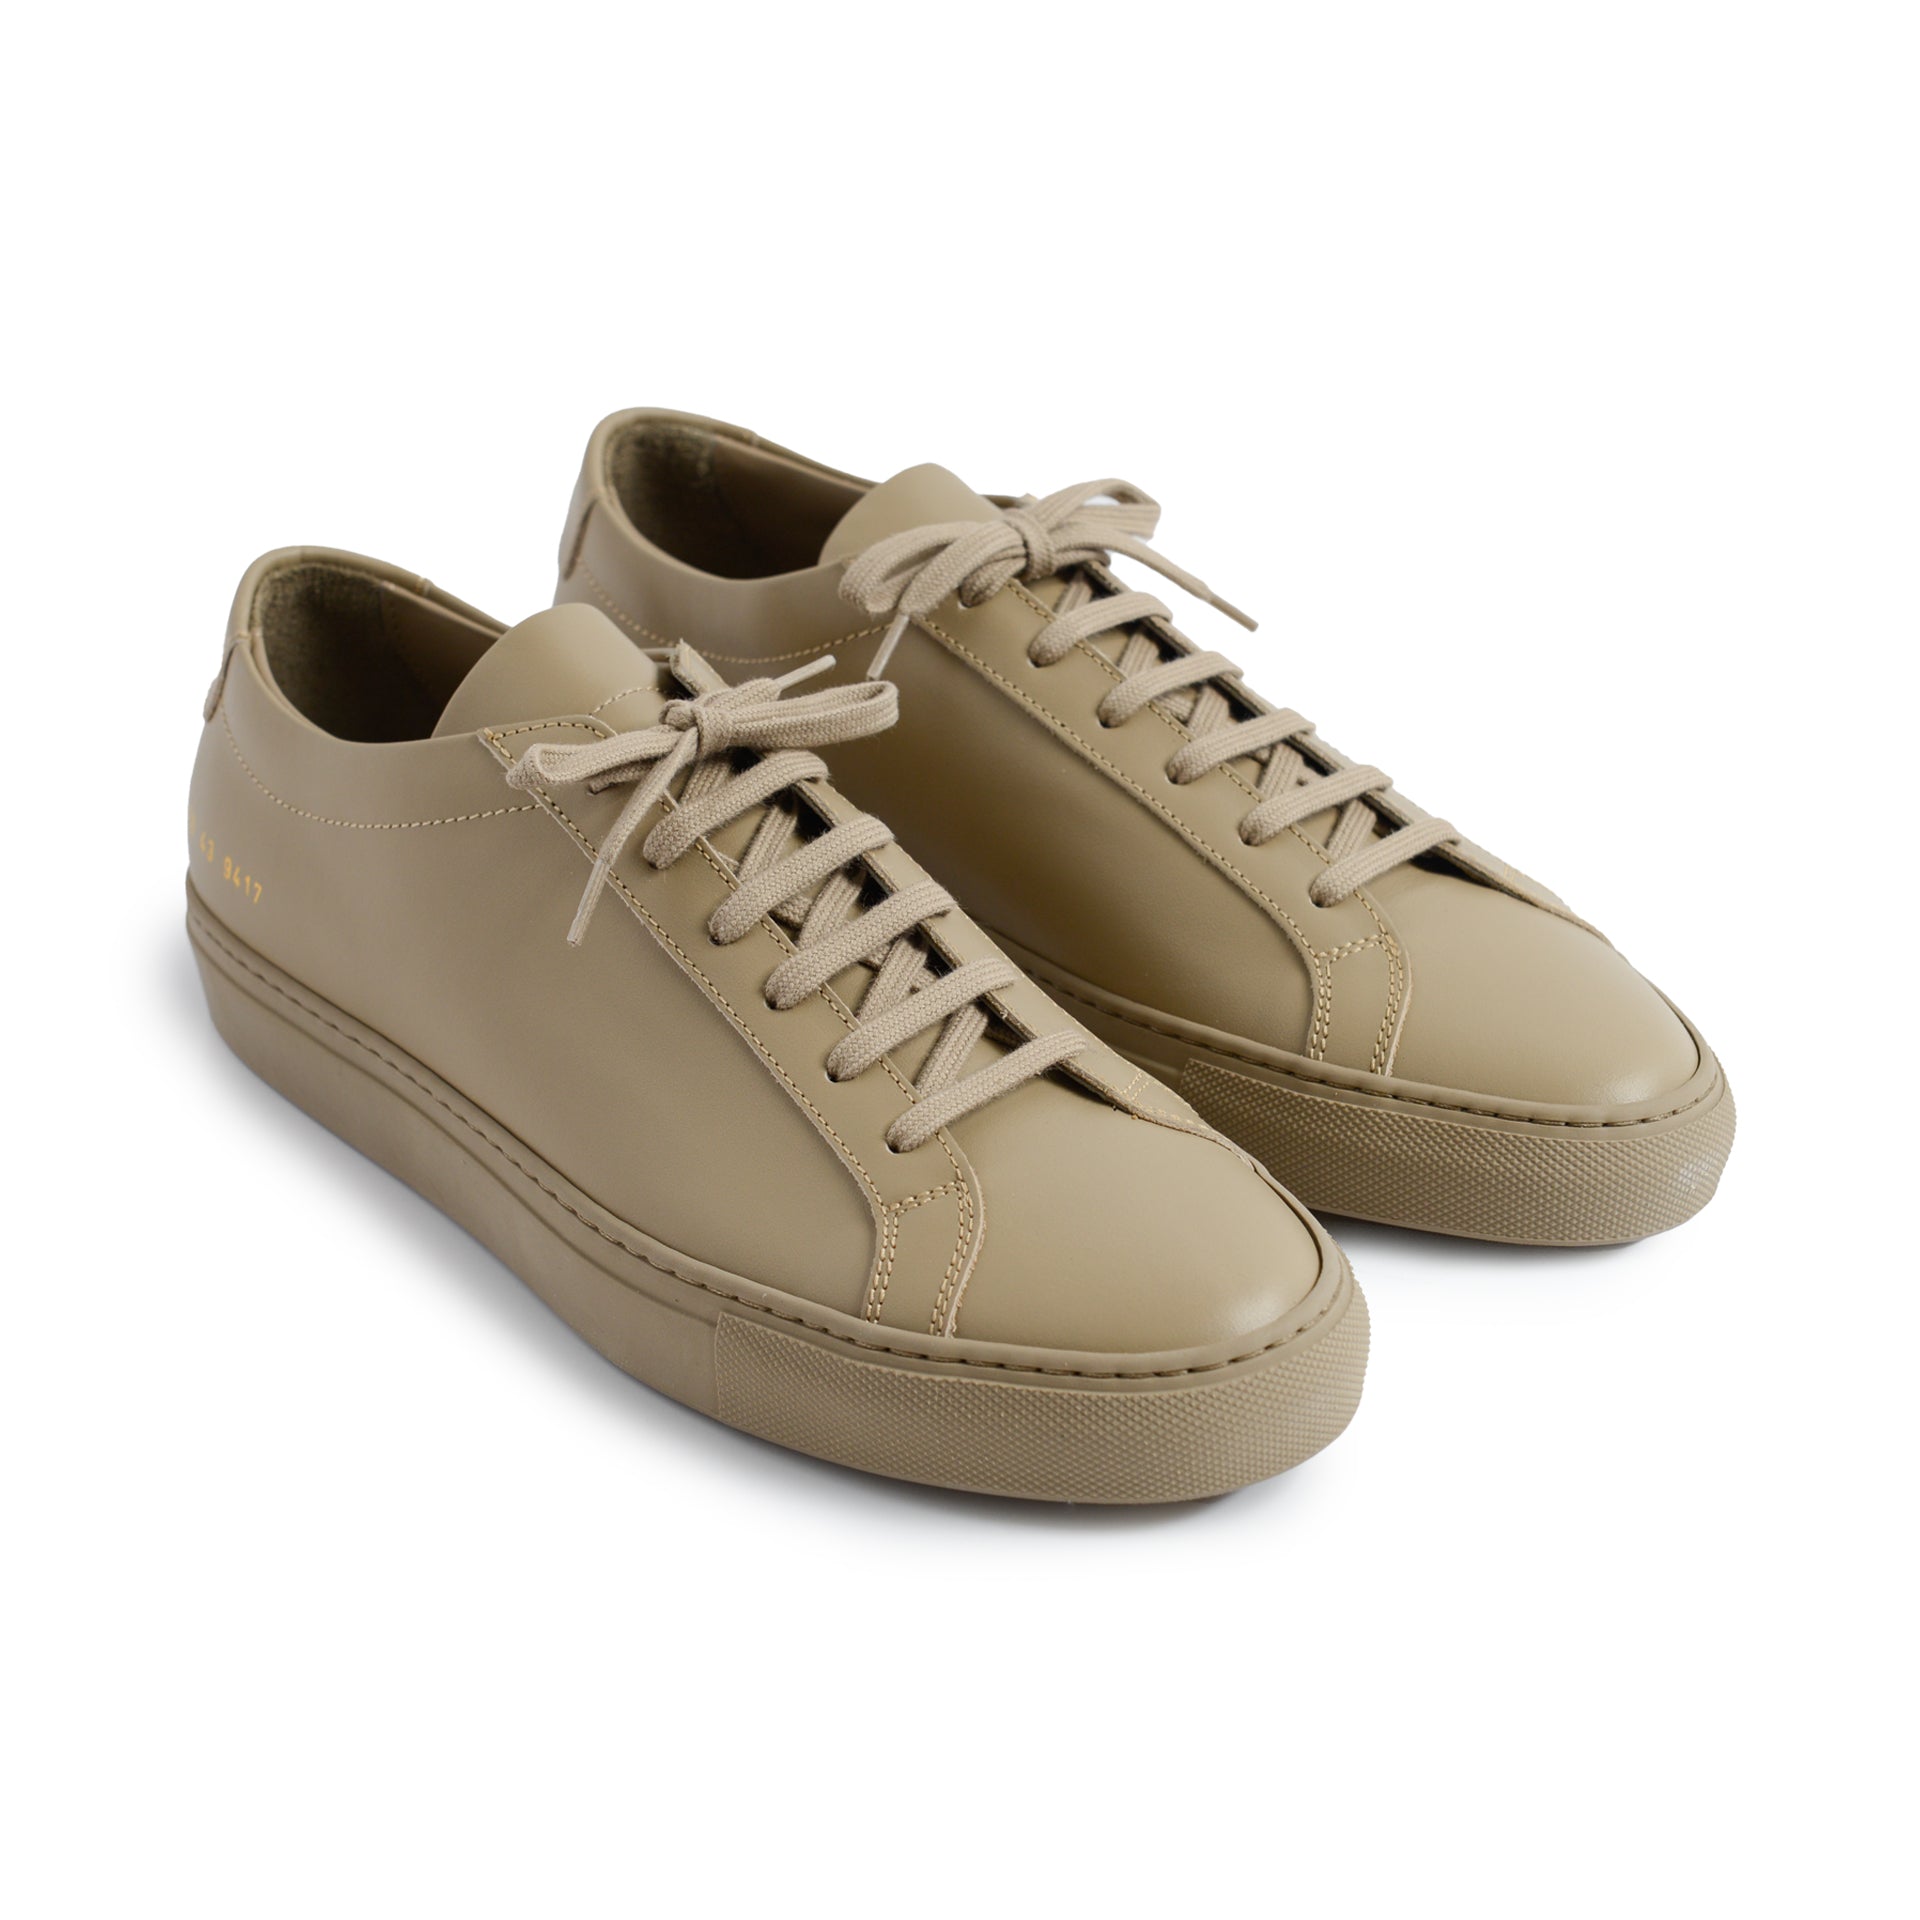 COMMON PROJECTS／ACHILLES LOW／色:ライトベージュカラー